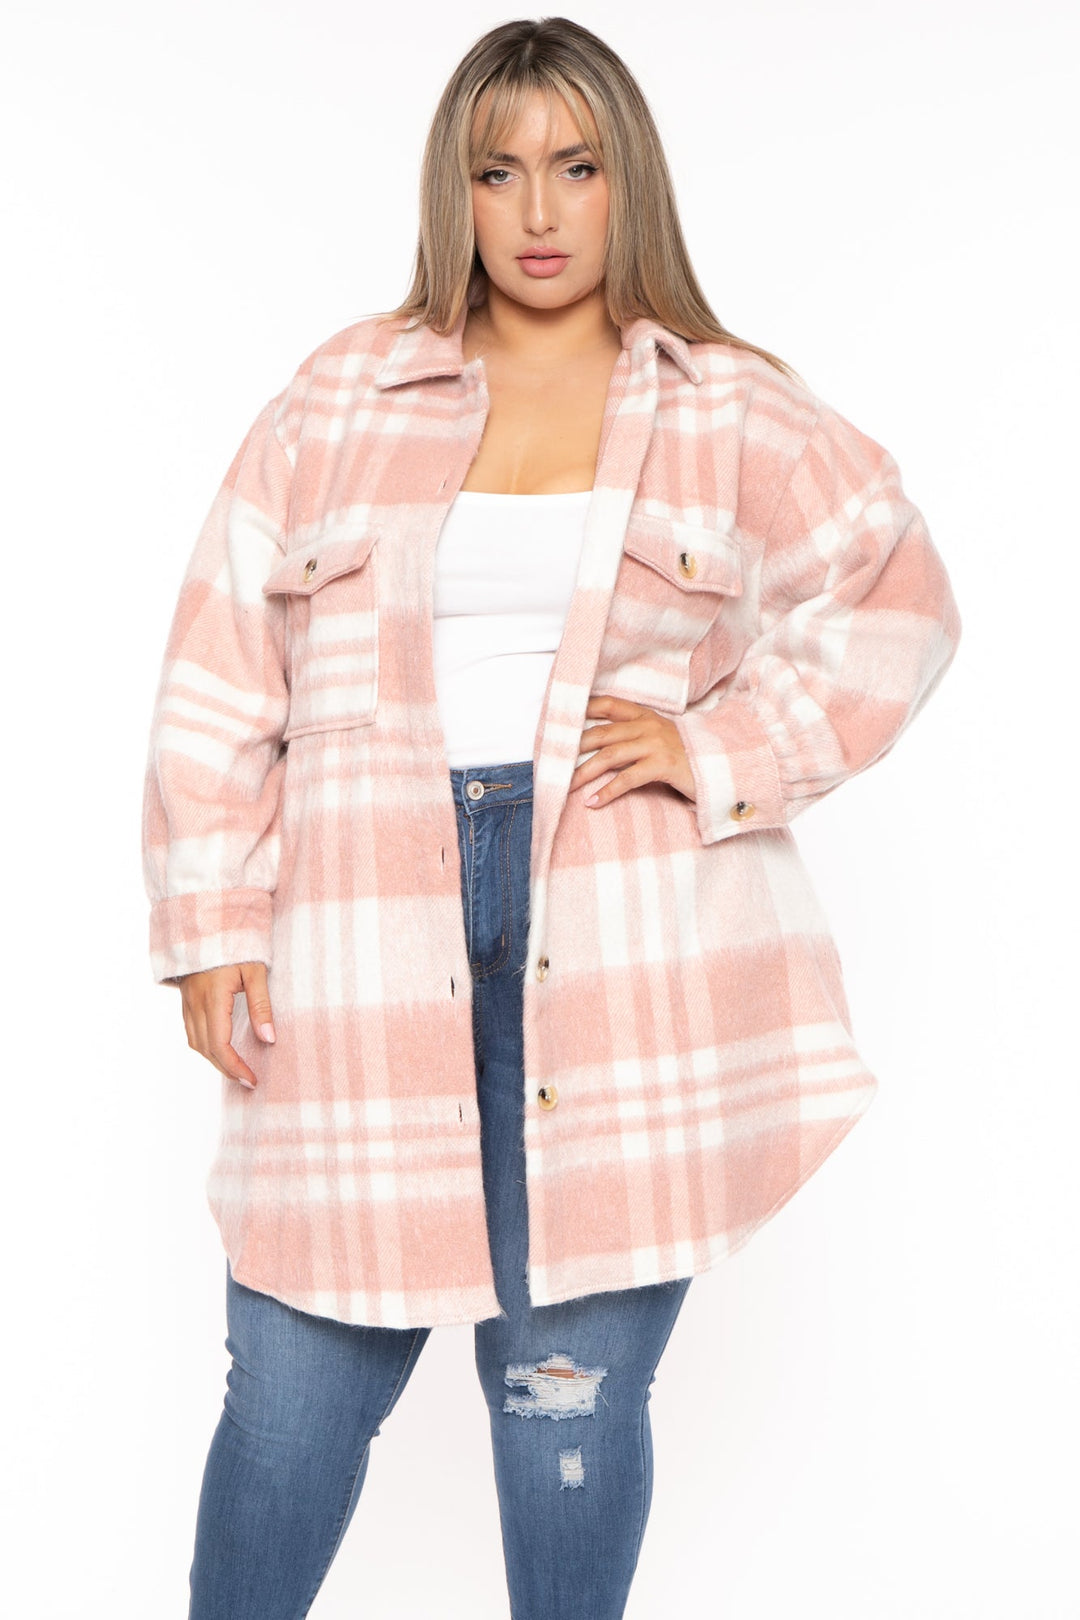 GEE GEE Jackets And Outerwear Plus Size Plaid Long  Jacket- Blush